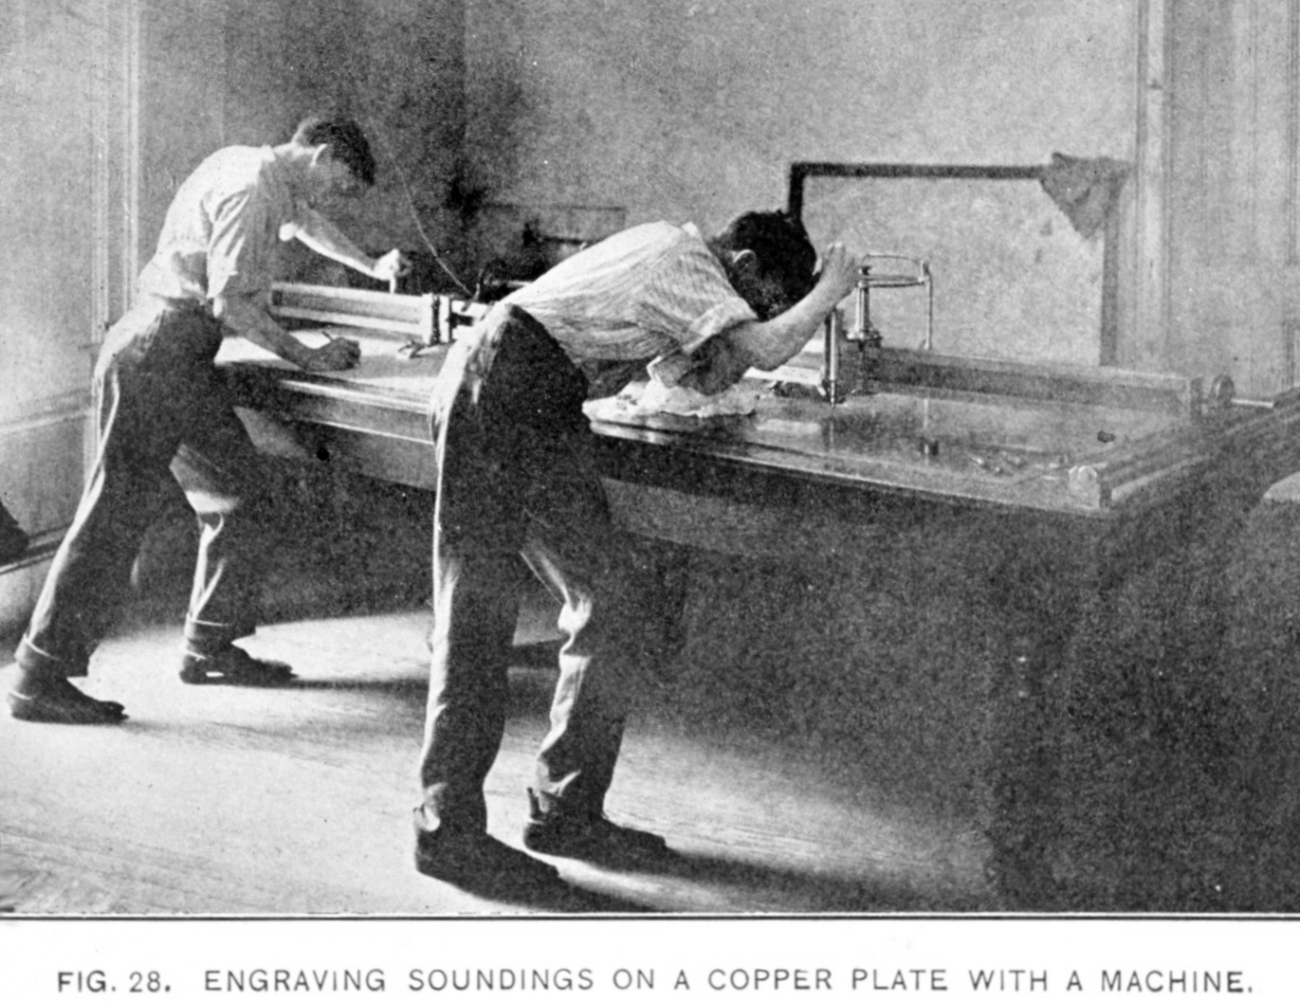 Engraving soundings on a copper plate with a machine